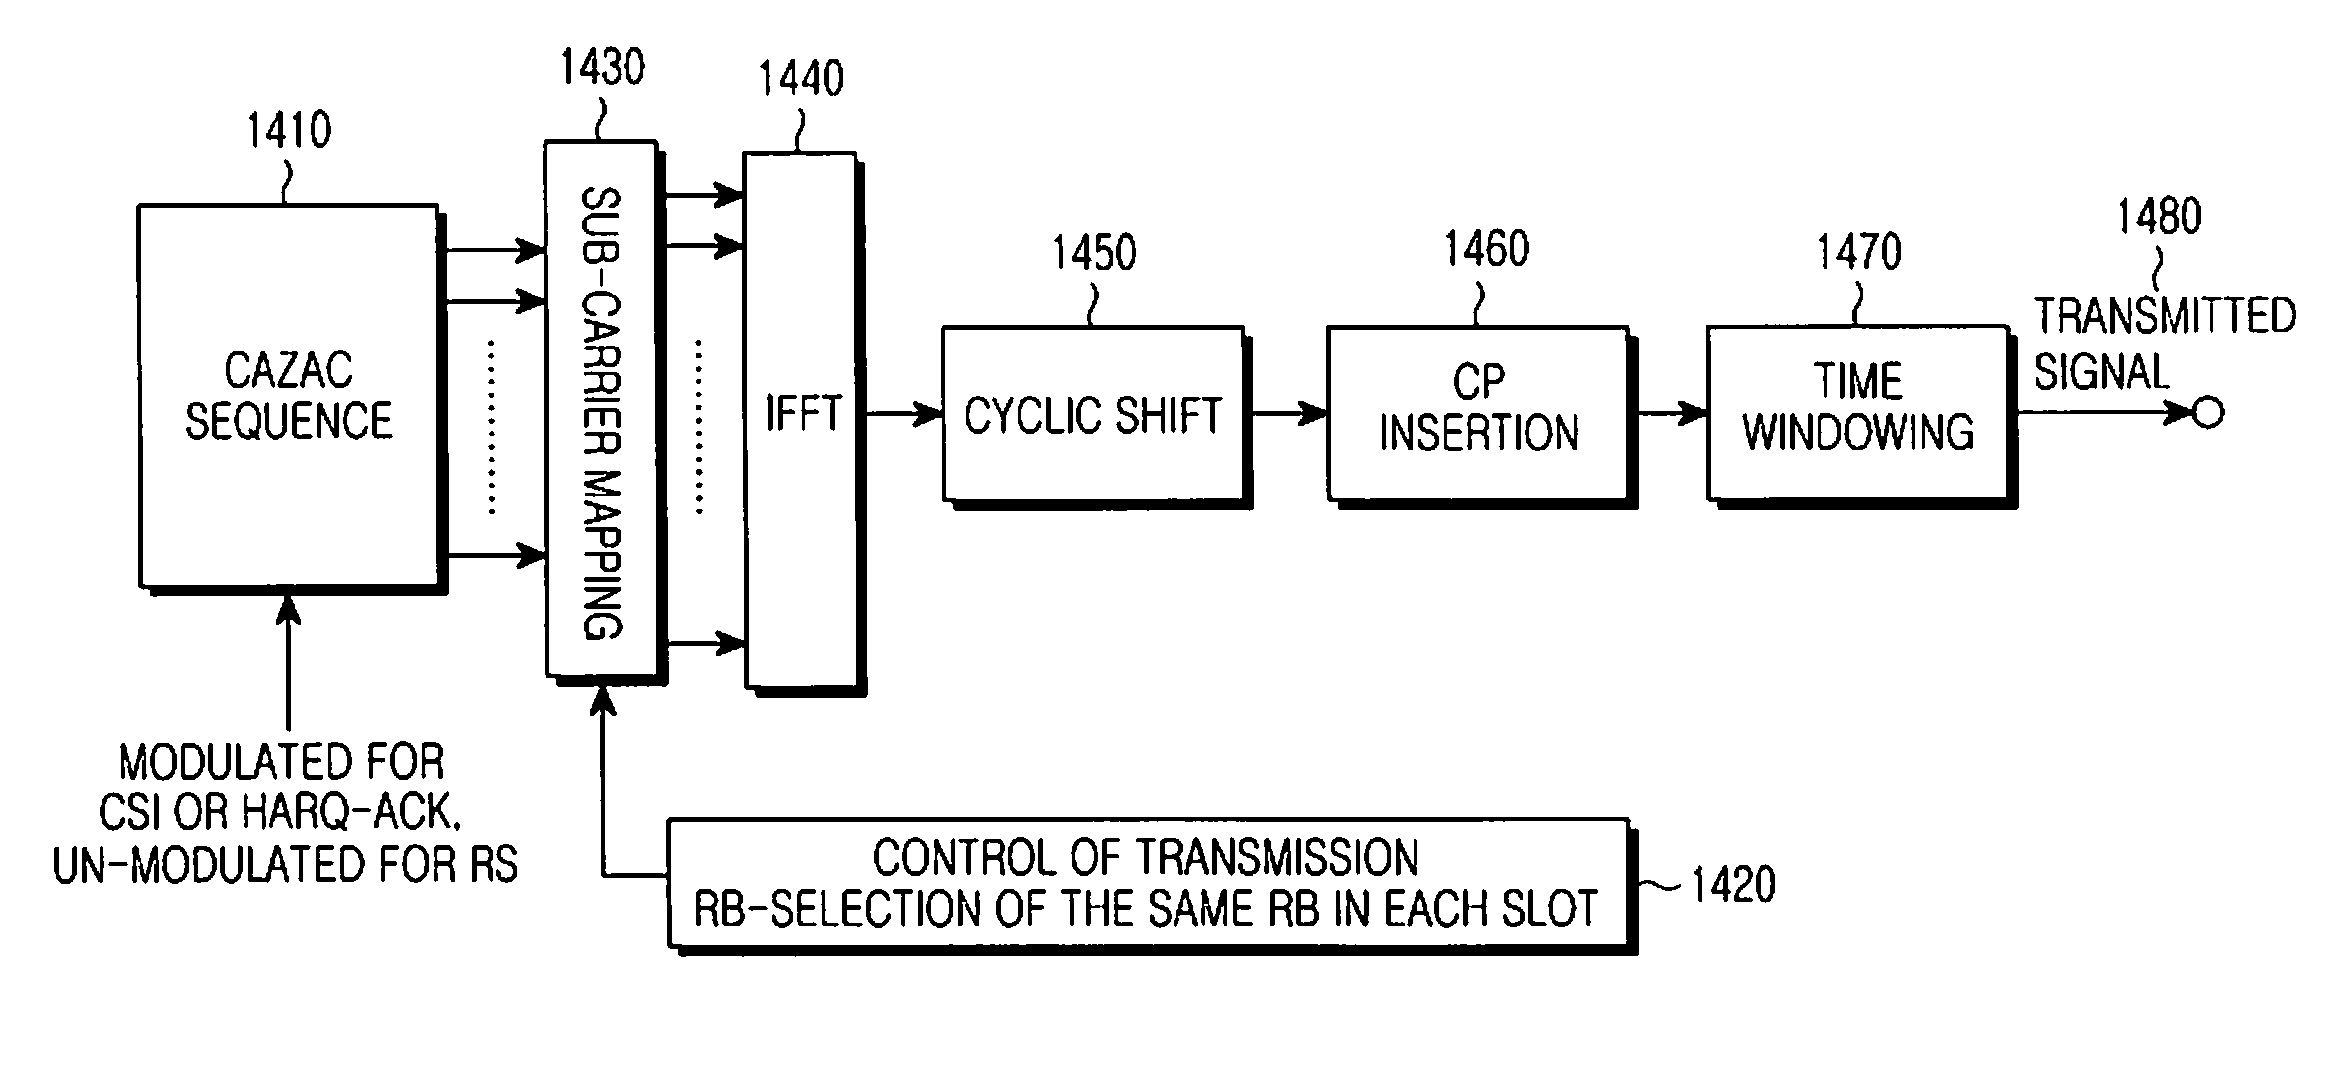 Selective application of frequency hopping for transmission of control signals